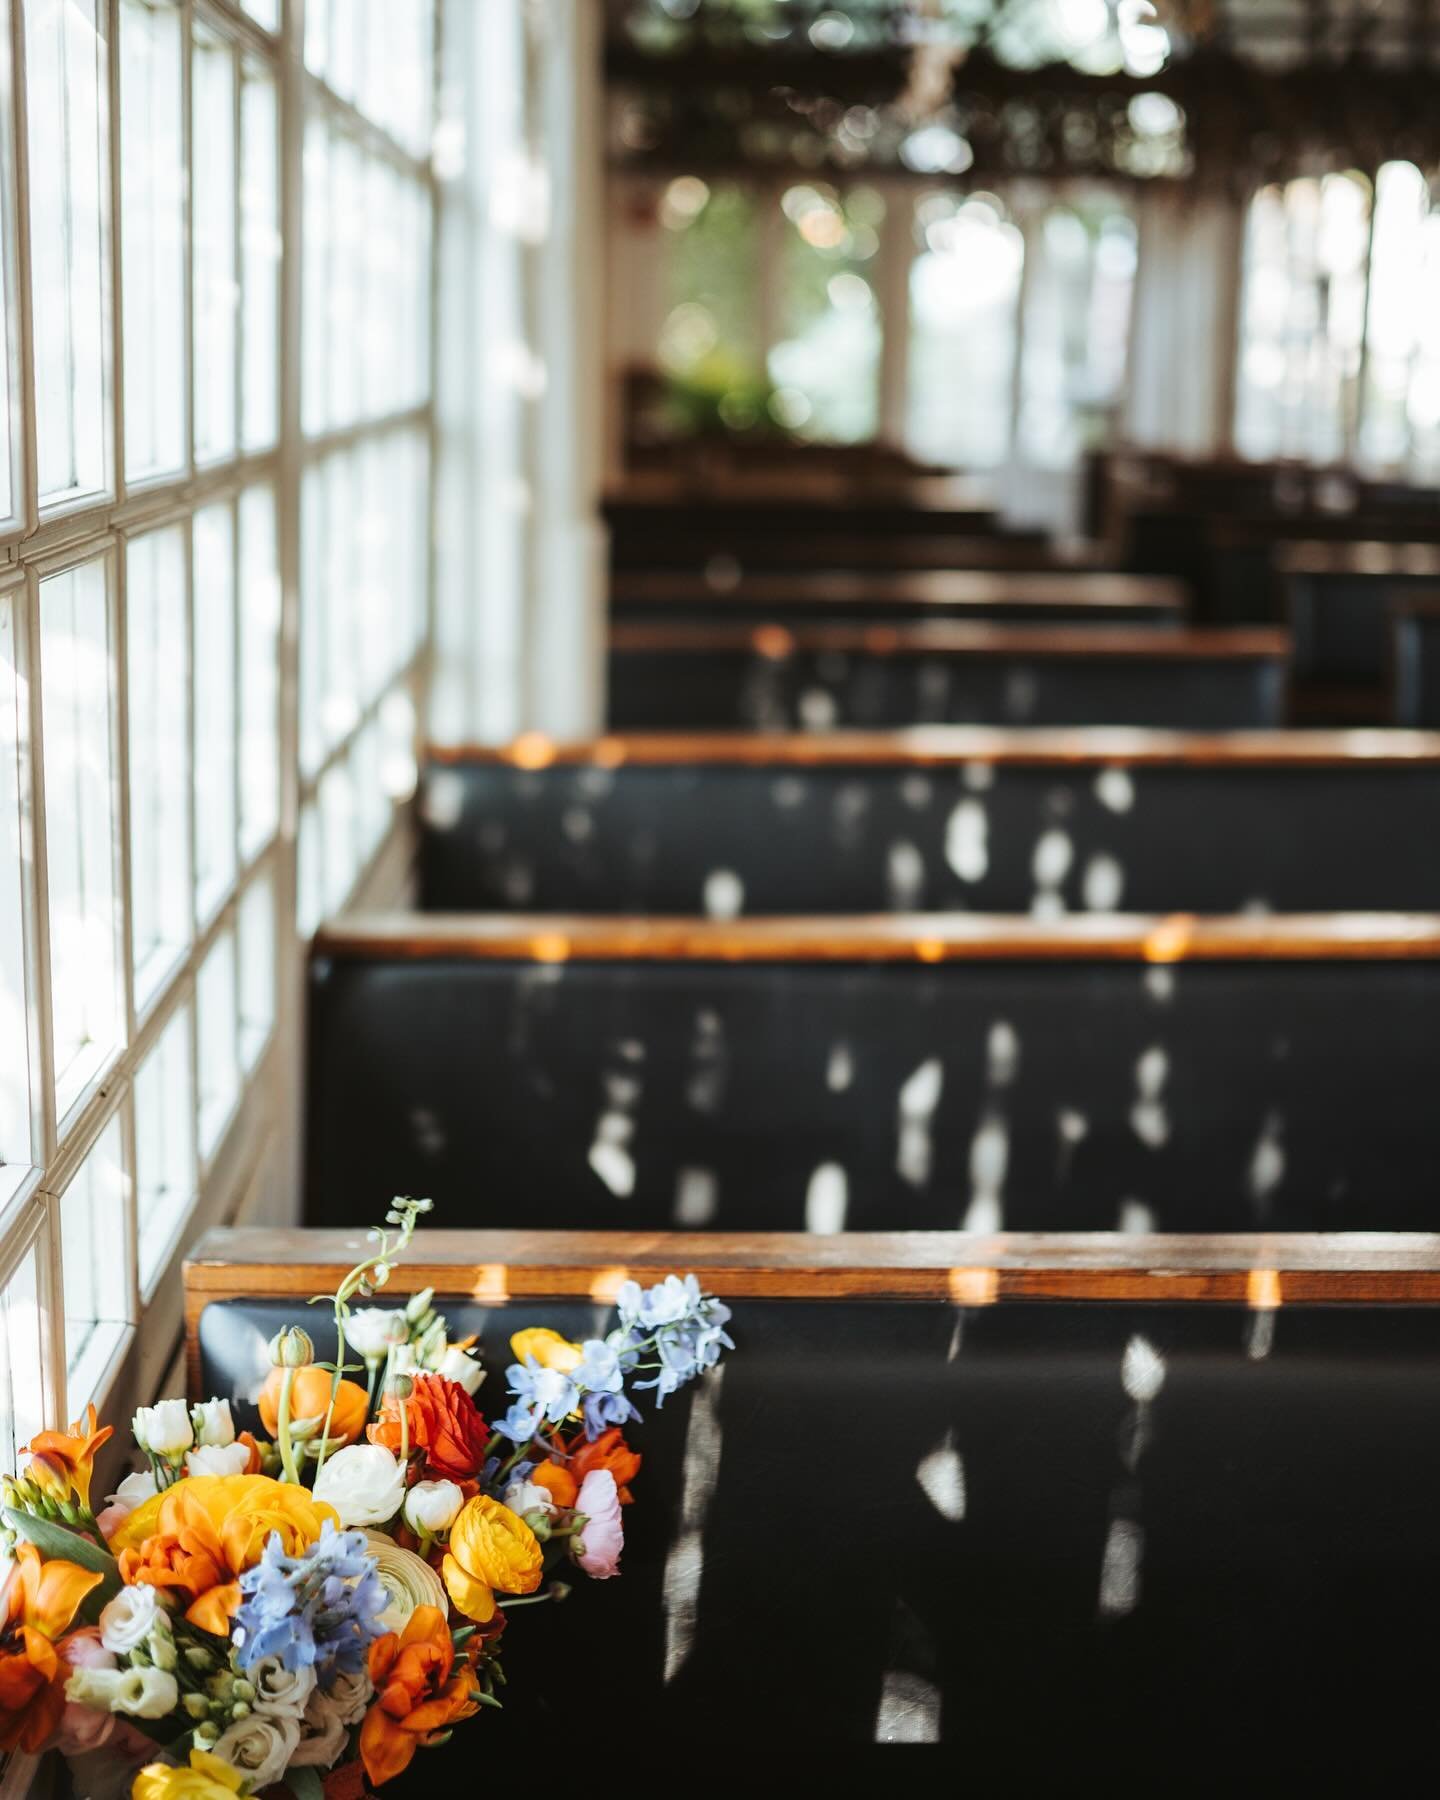 Some days ago in beautiful wedding venue @ladue.duesseldorf 

Some details of this beautiful location.
Lovely styledshooting.

Photo by me 🧡
Concept &amp; Organisation:
@valeriawedding_ &amp; 
@sachartschenko_photography
Decoration &amp; Flowers: @l